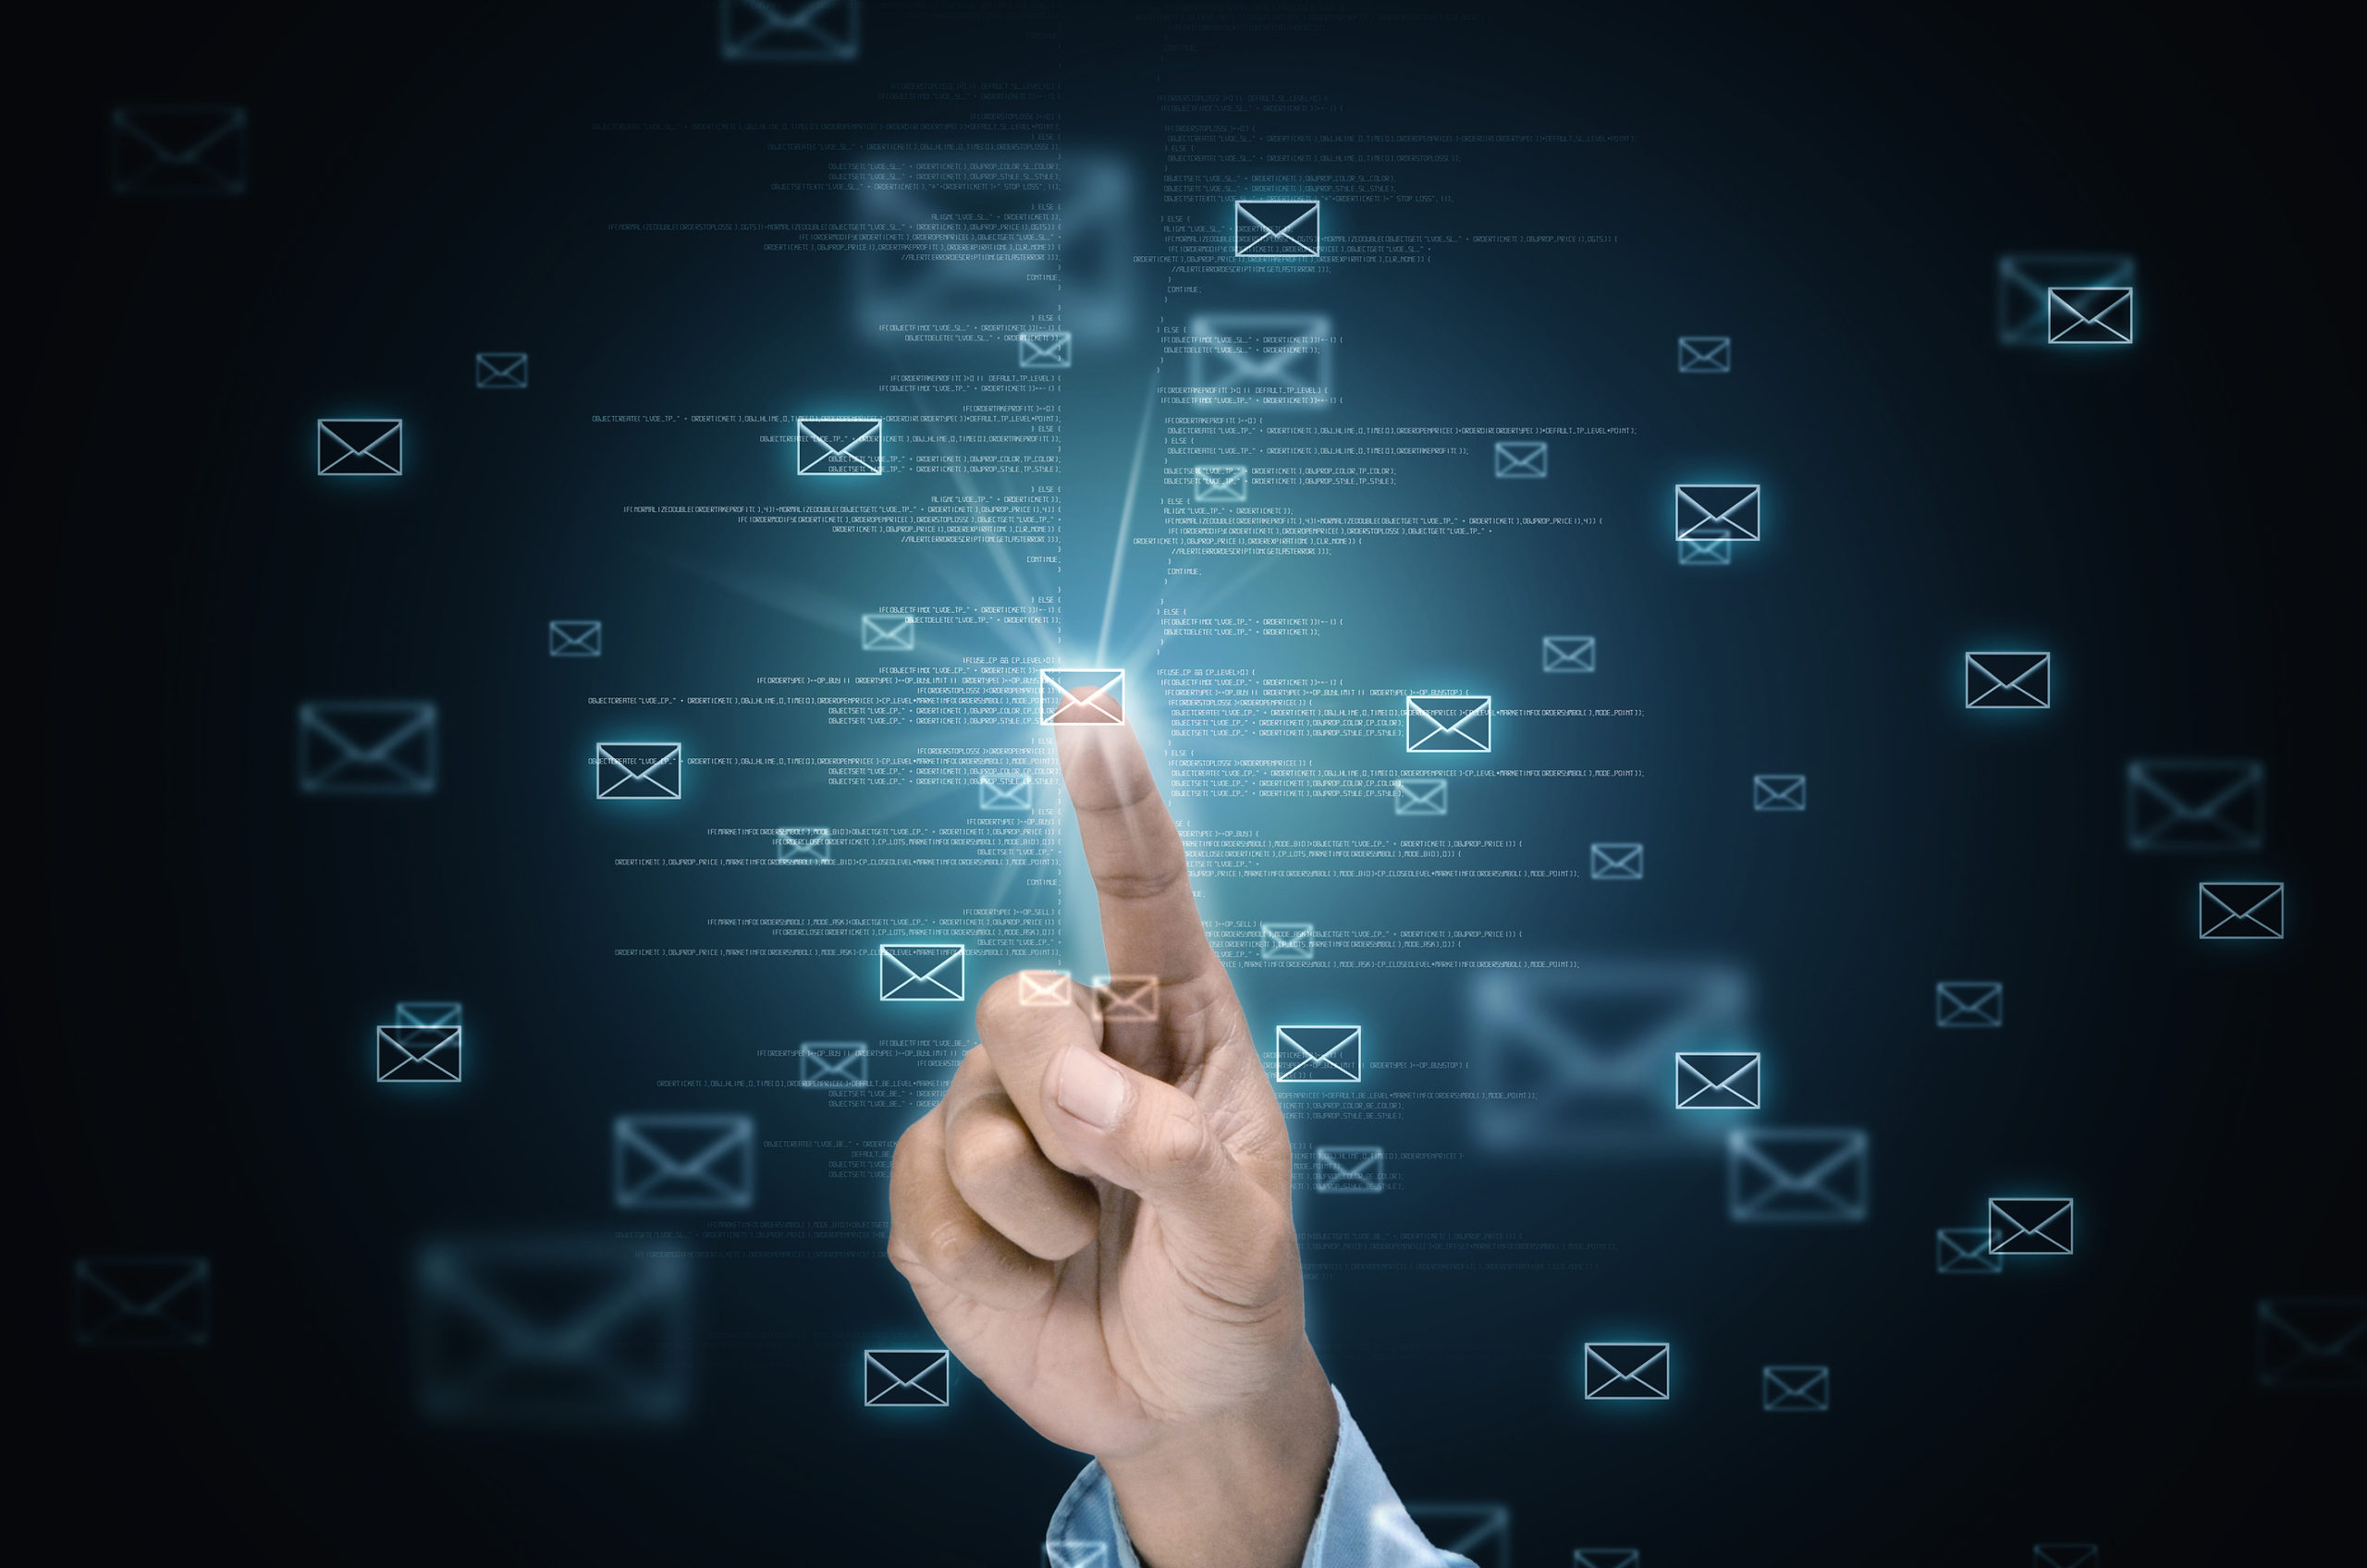 Email Archiving – Do You Need to Keep Everything